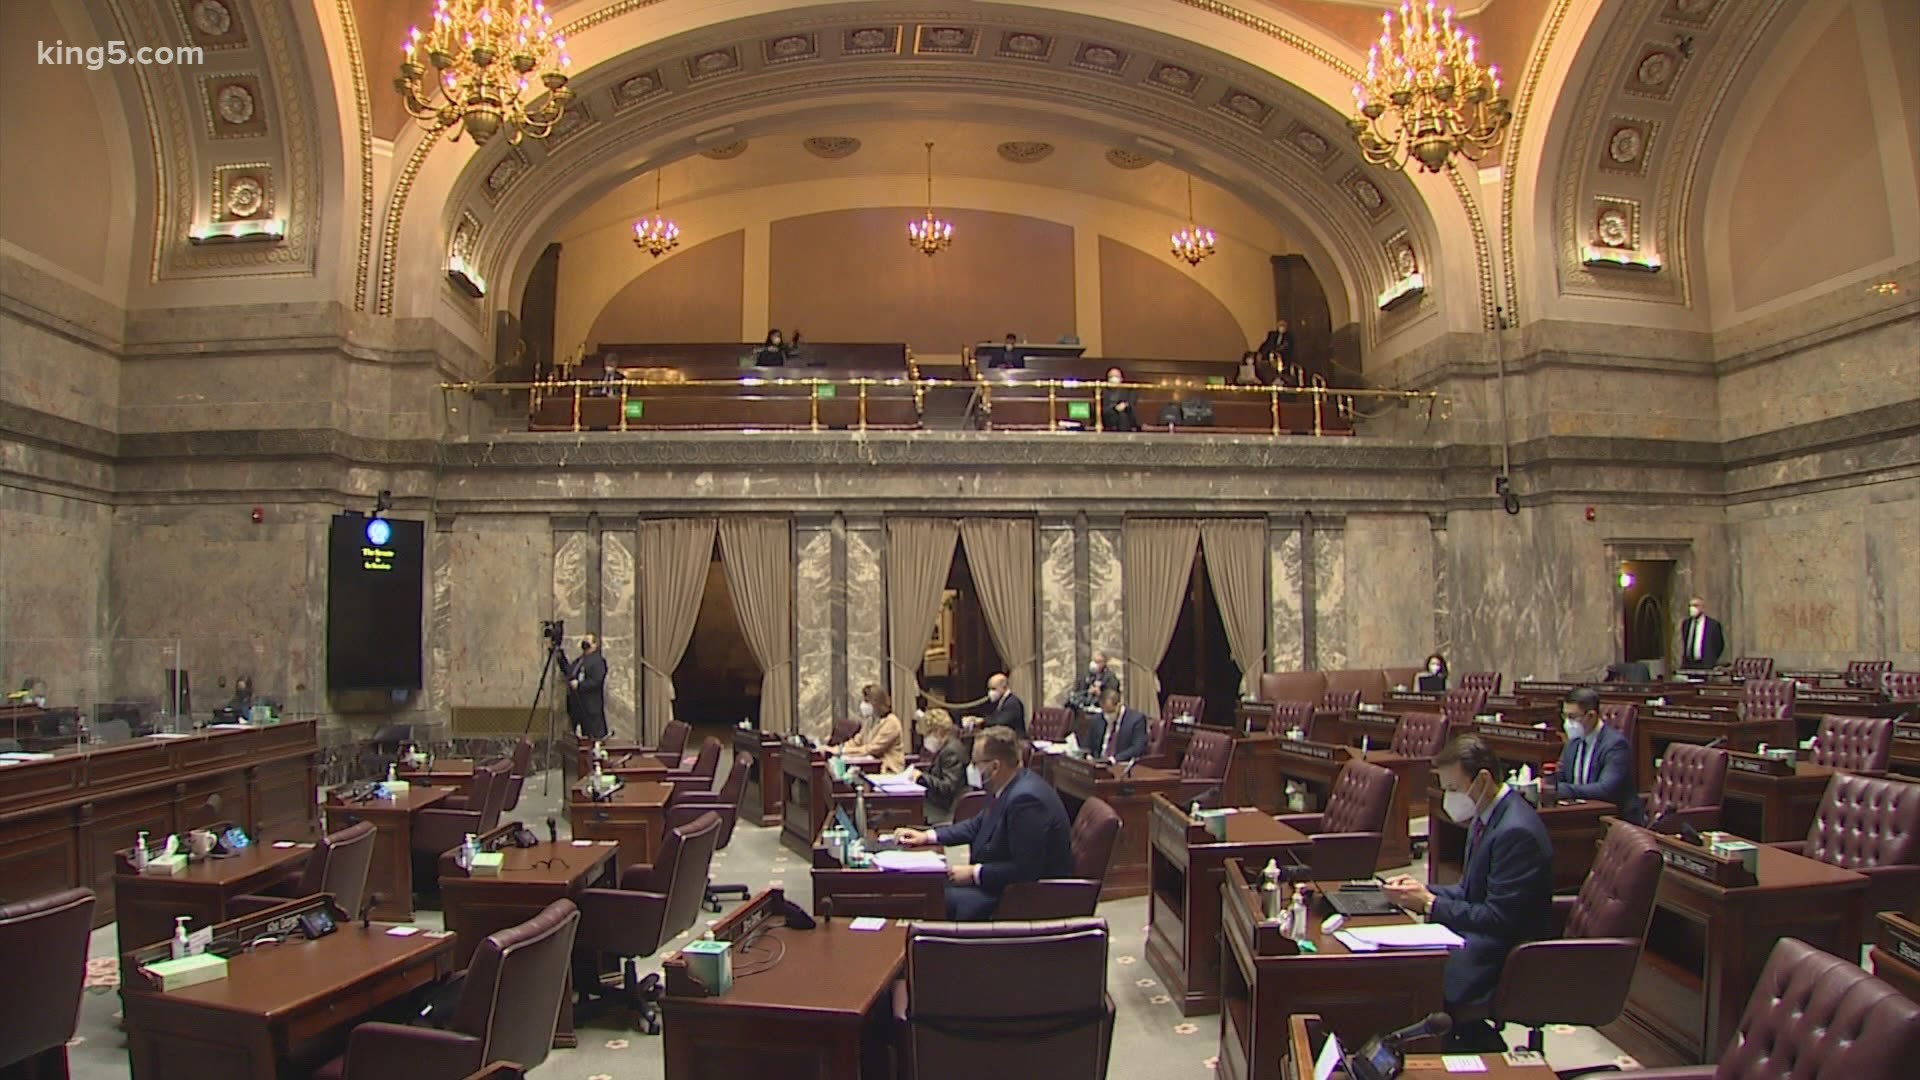 There has been increased security at the state Capitol in Olympia since the start of the legislative session last week and it will continue through Inauguration Day.